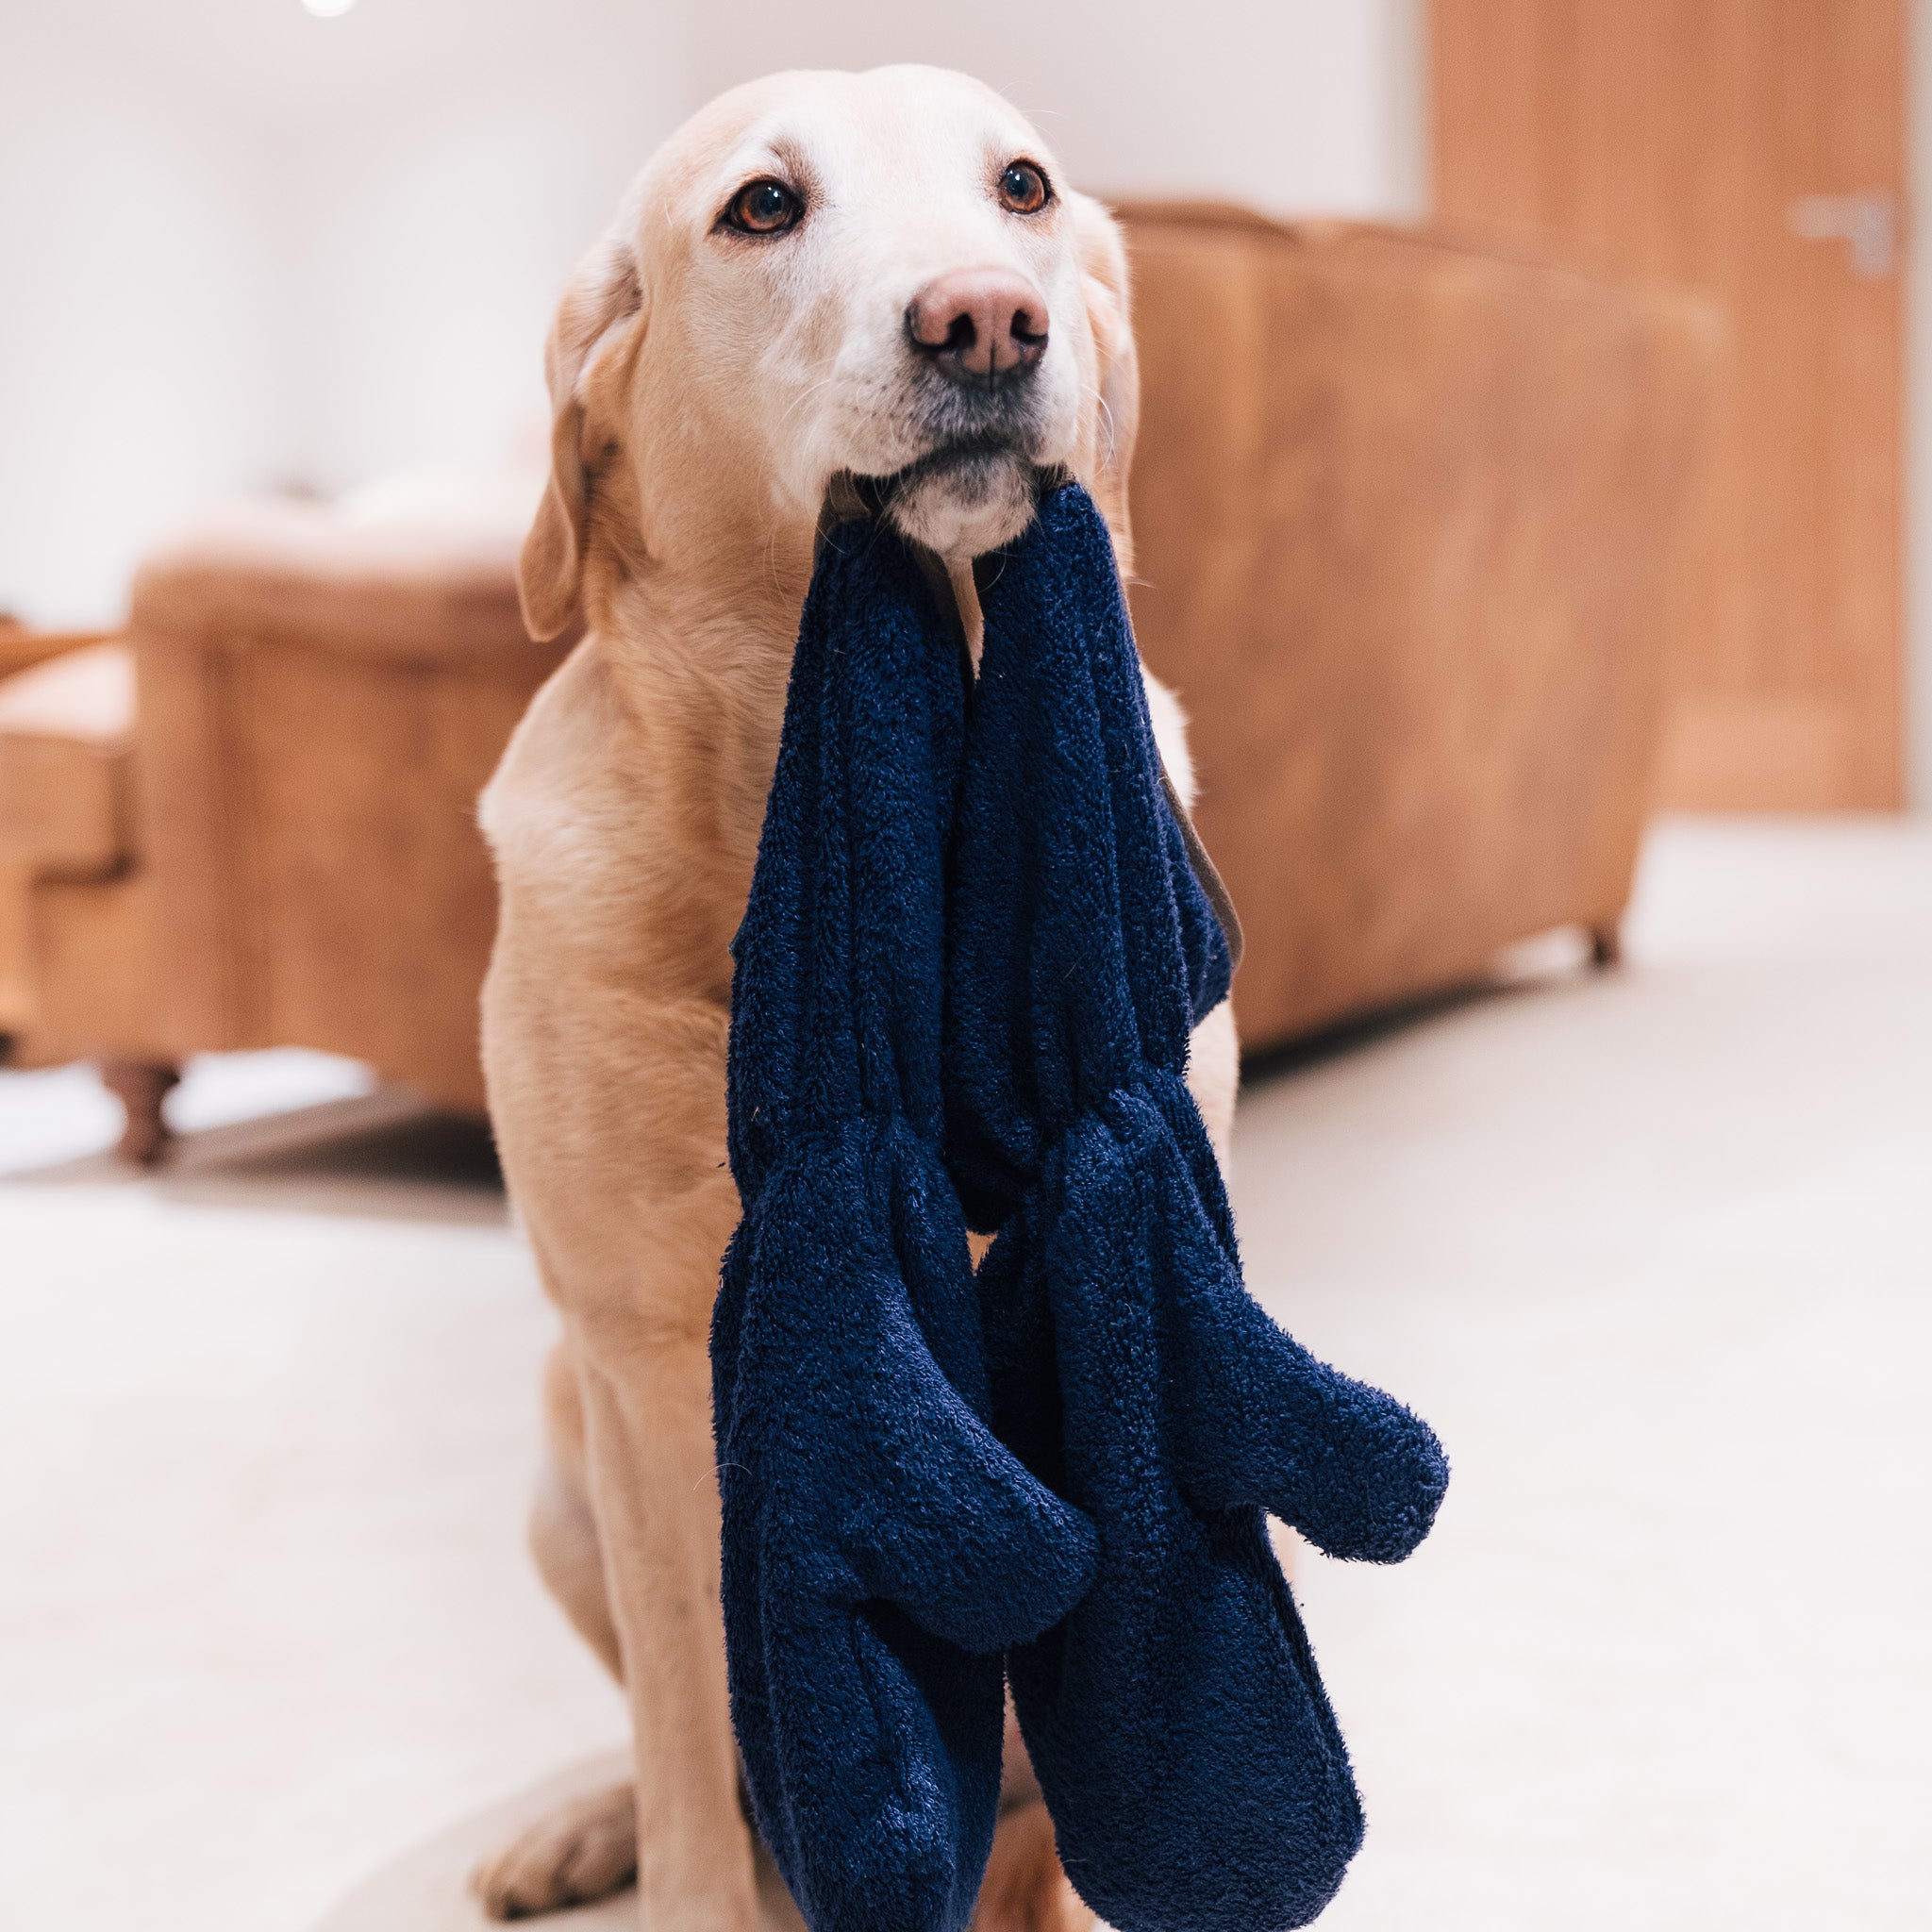 Labrador carefully holding a pair of navy blue NASH bamboo dog drying mitts in its mouth.